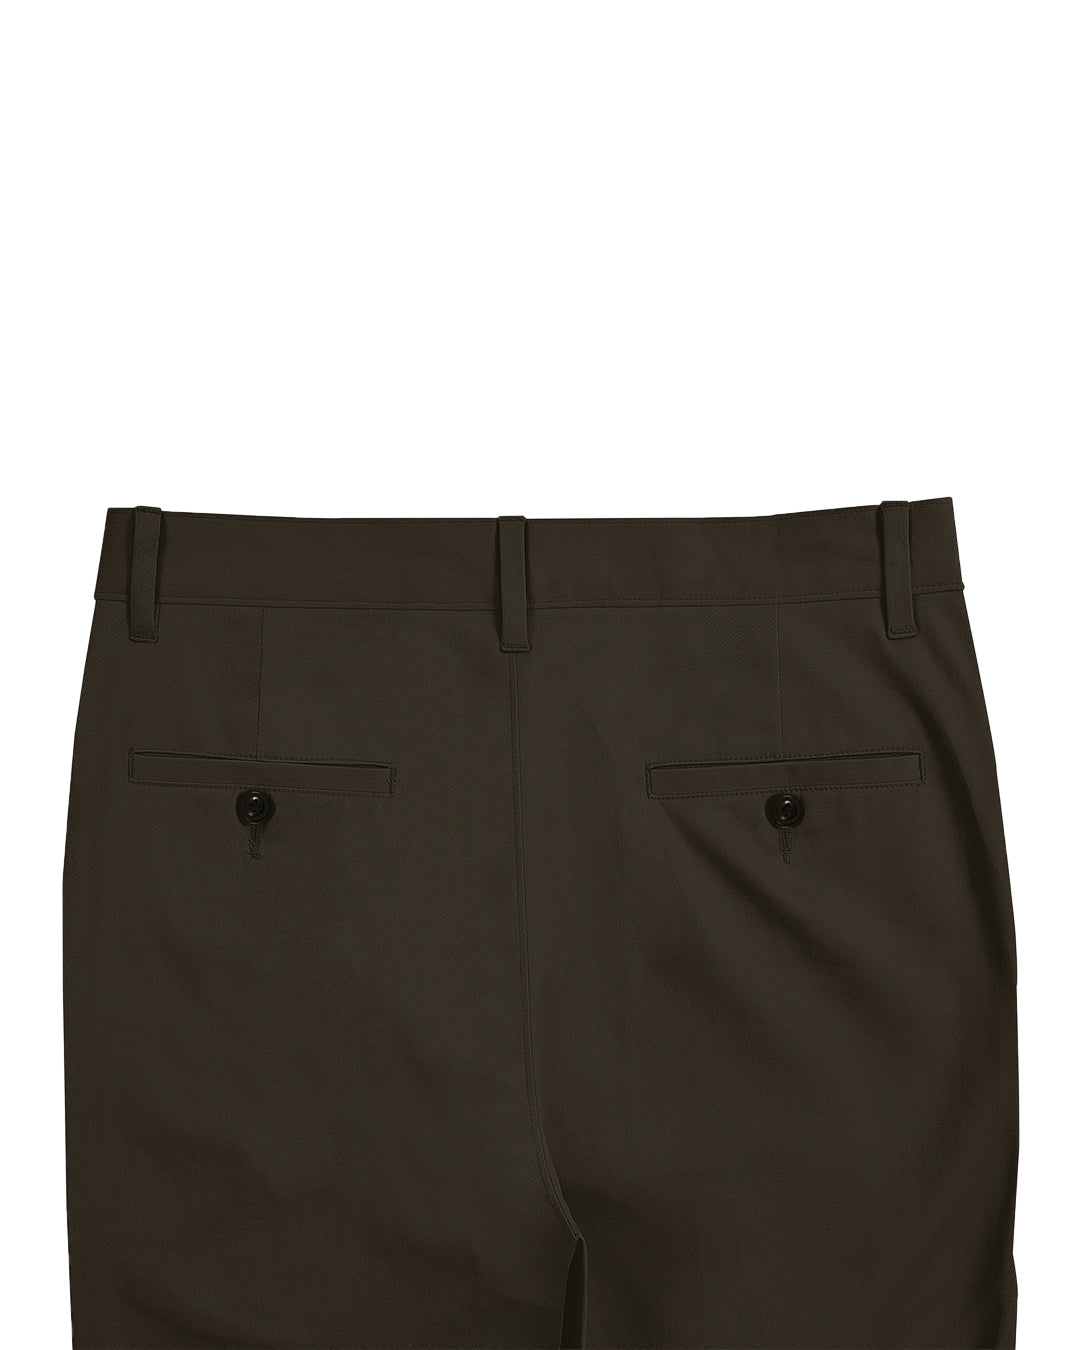 Back view of custom Genoa Chino pants for men by Luxire in brown